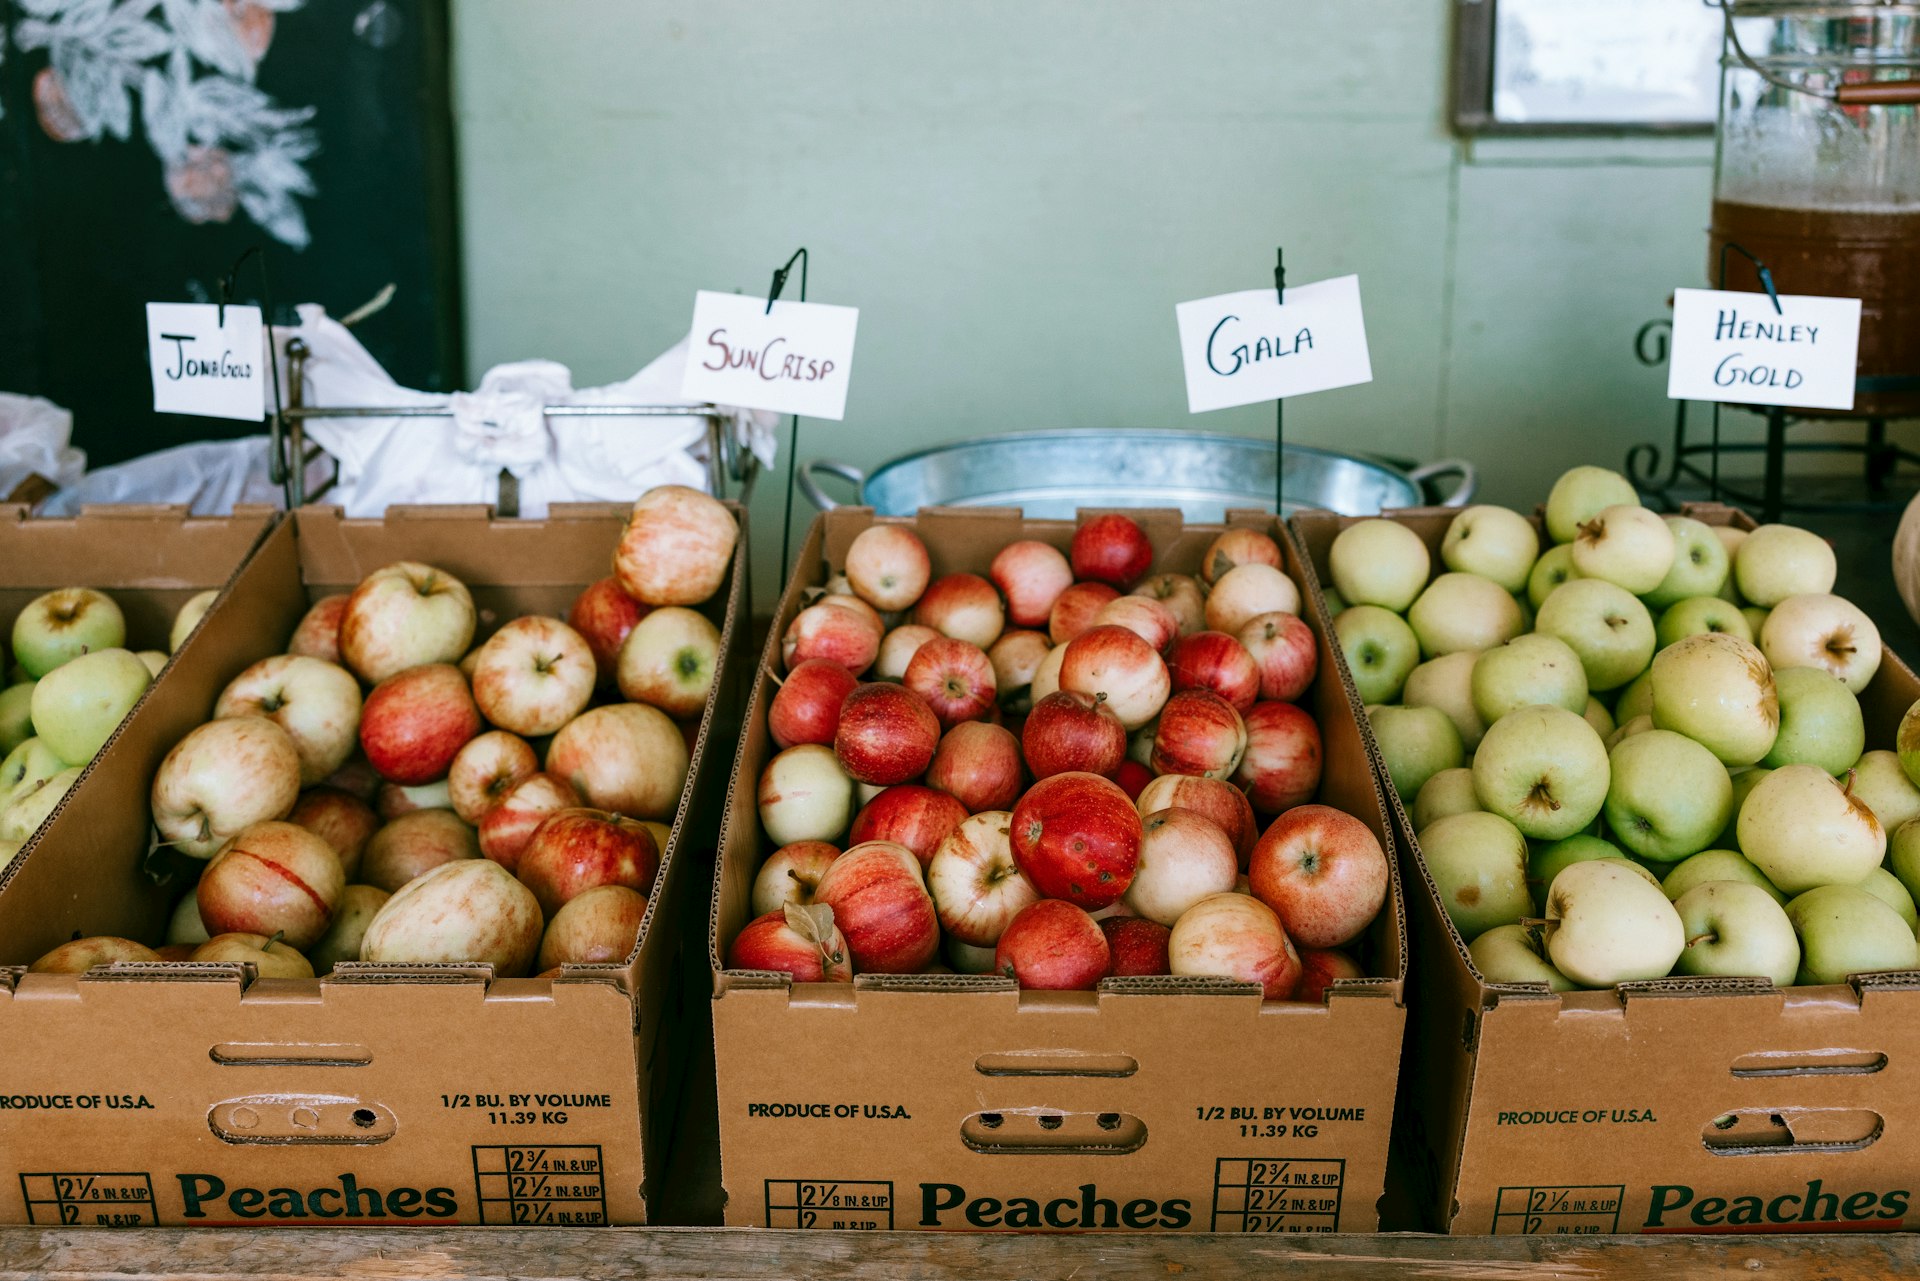 Crates of apples for sale in Virginia